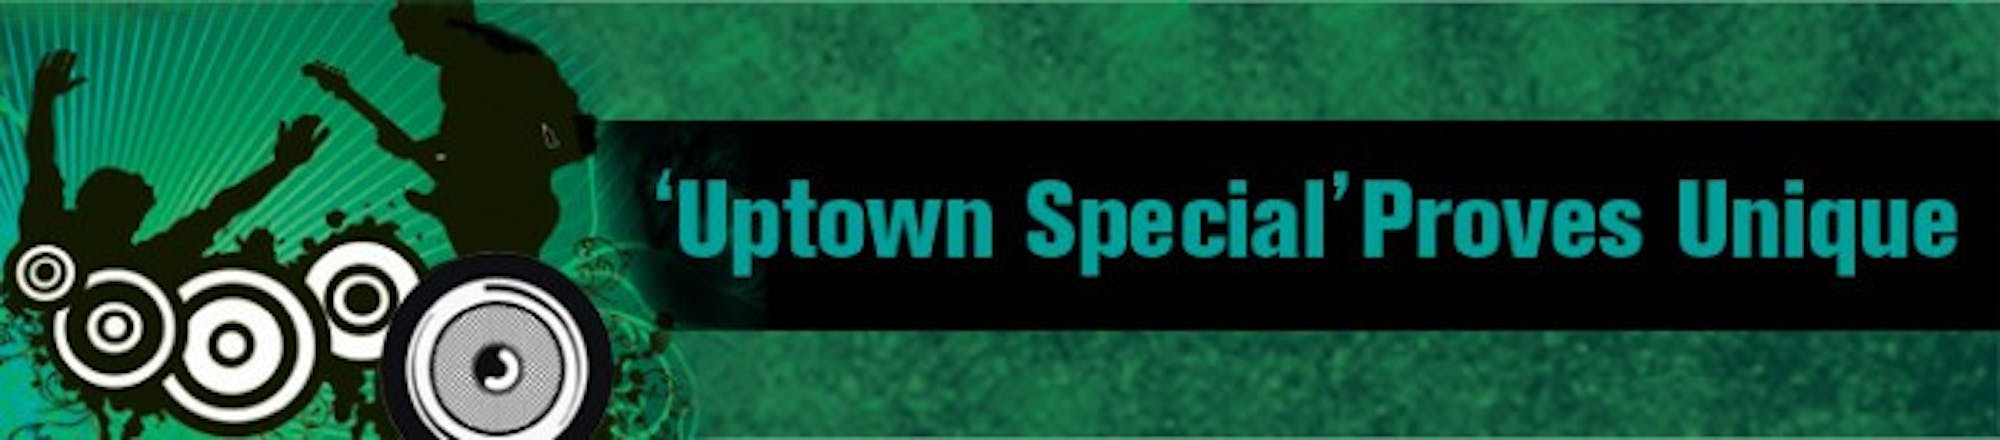 UptownSpecial_WEB